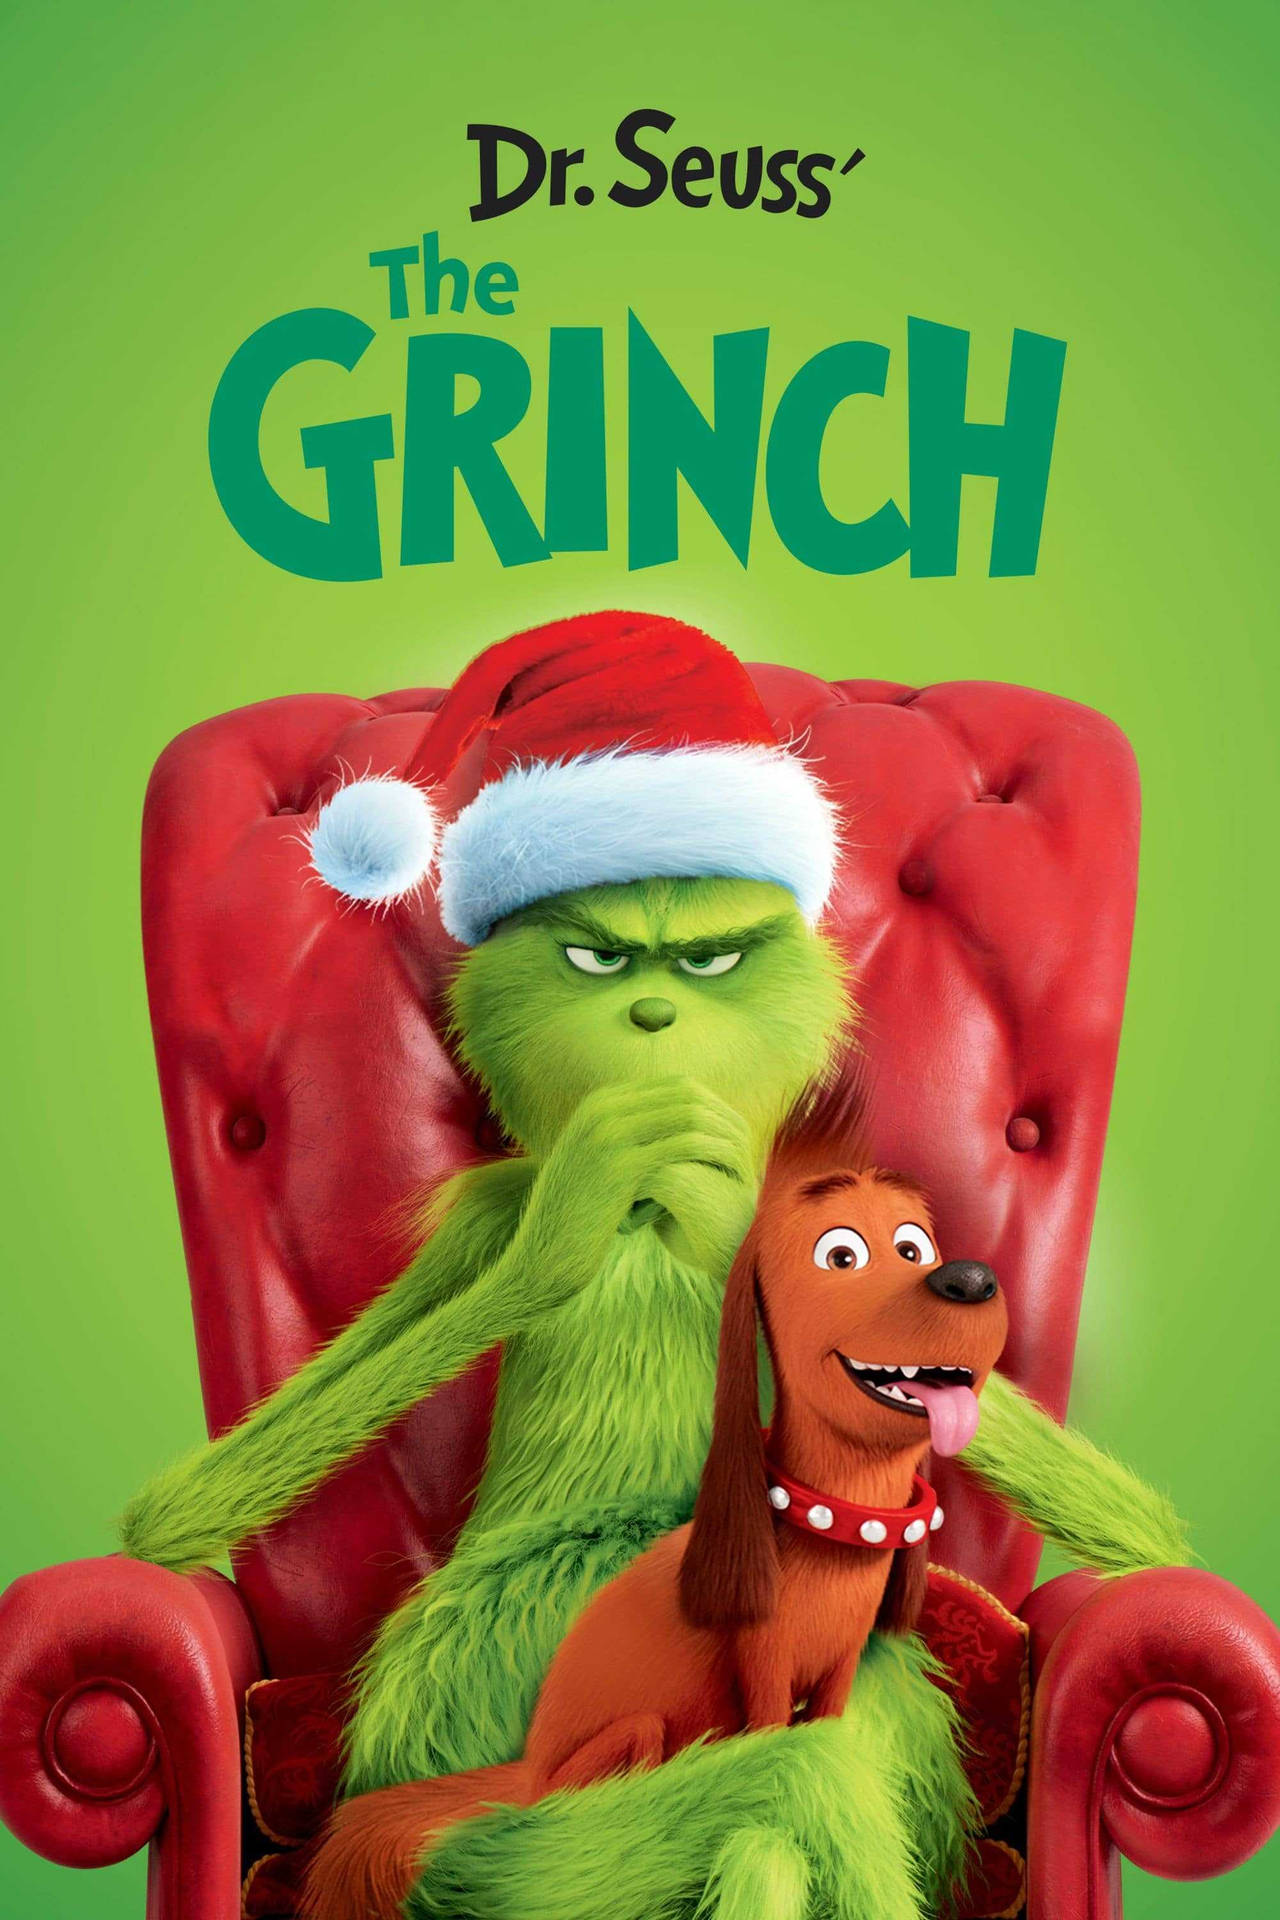 Grinch Wallpaper Images